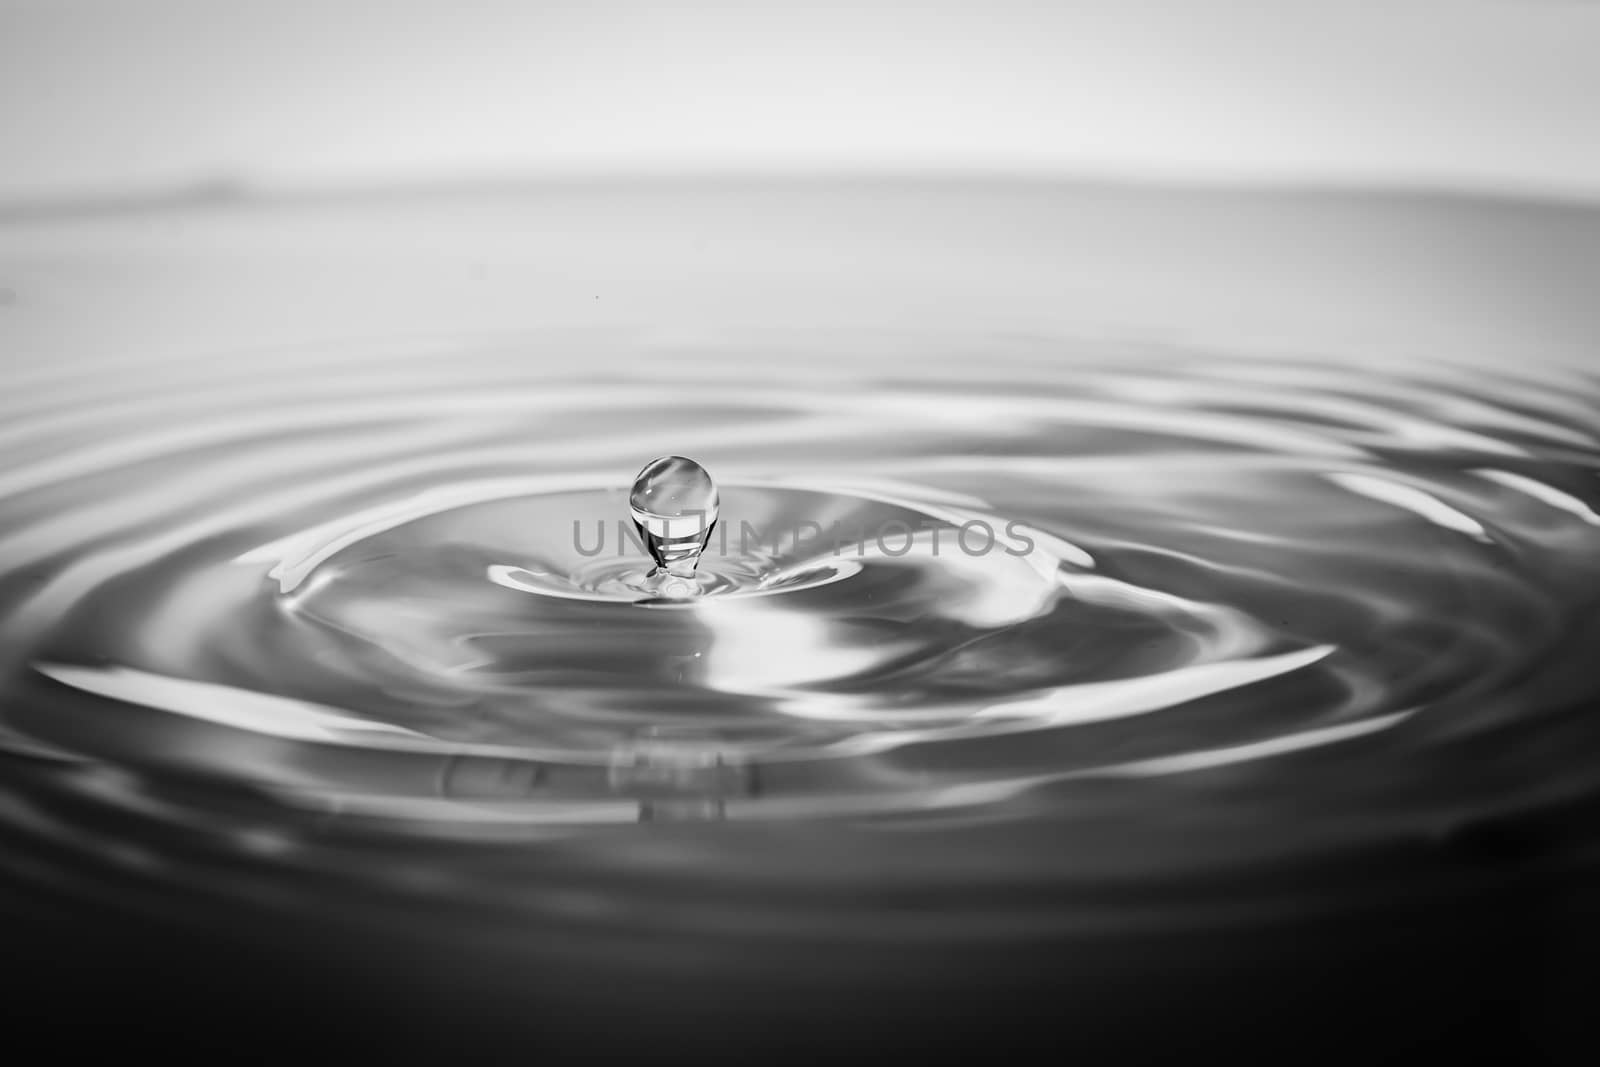 Impact instant of a drop of water by IVYPHOTOS